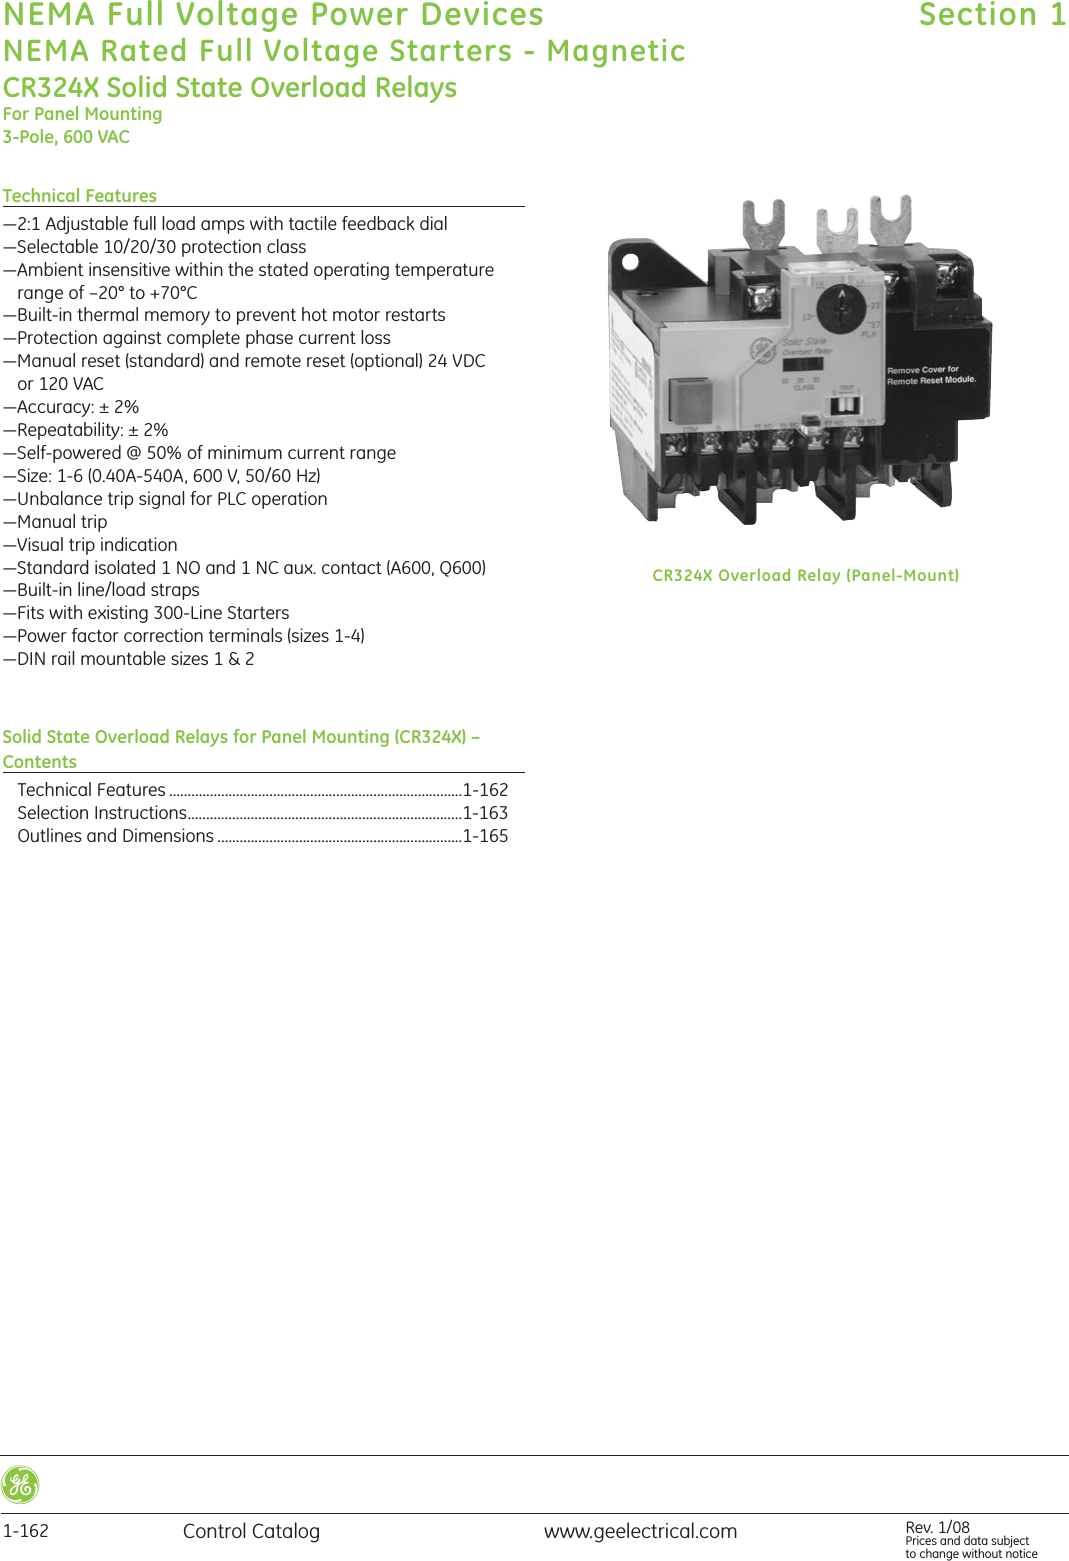 Page 1 of 2 - GE Control Catalog - Section 1  Brochure